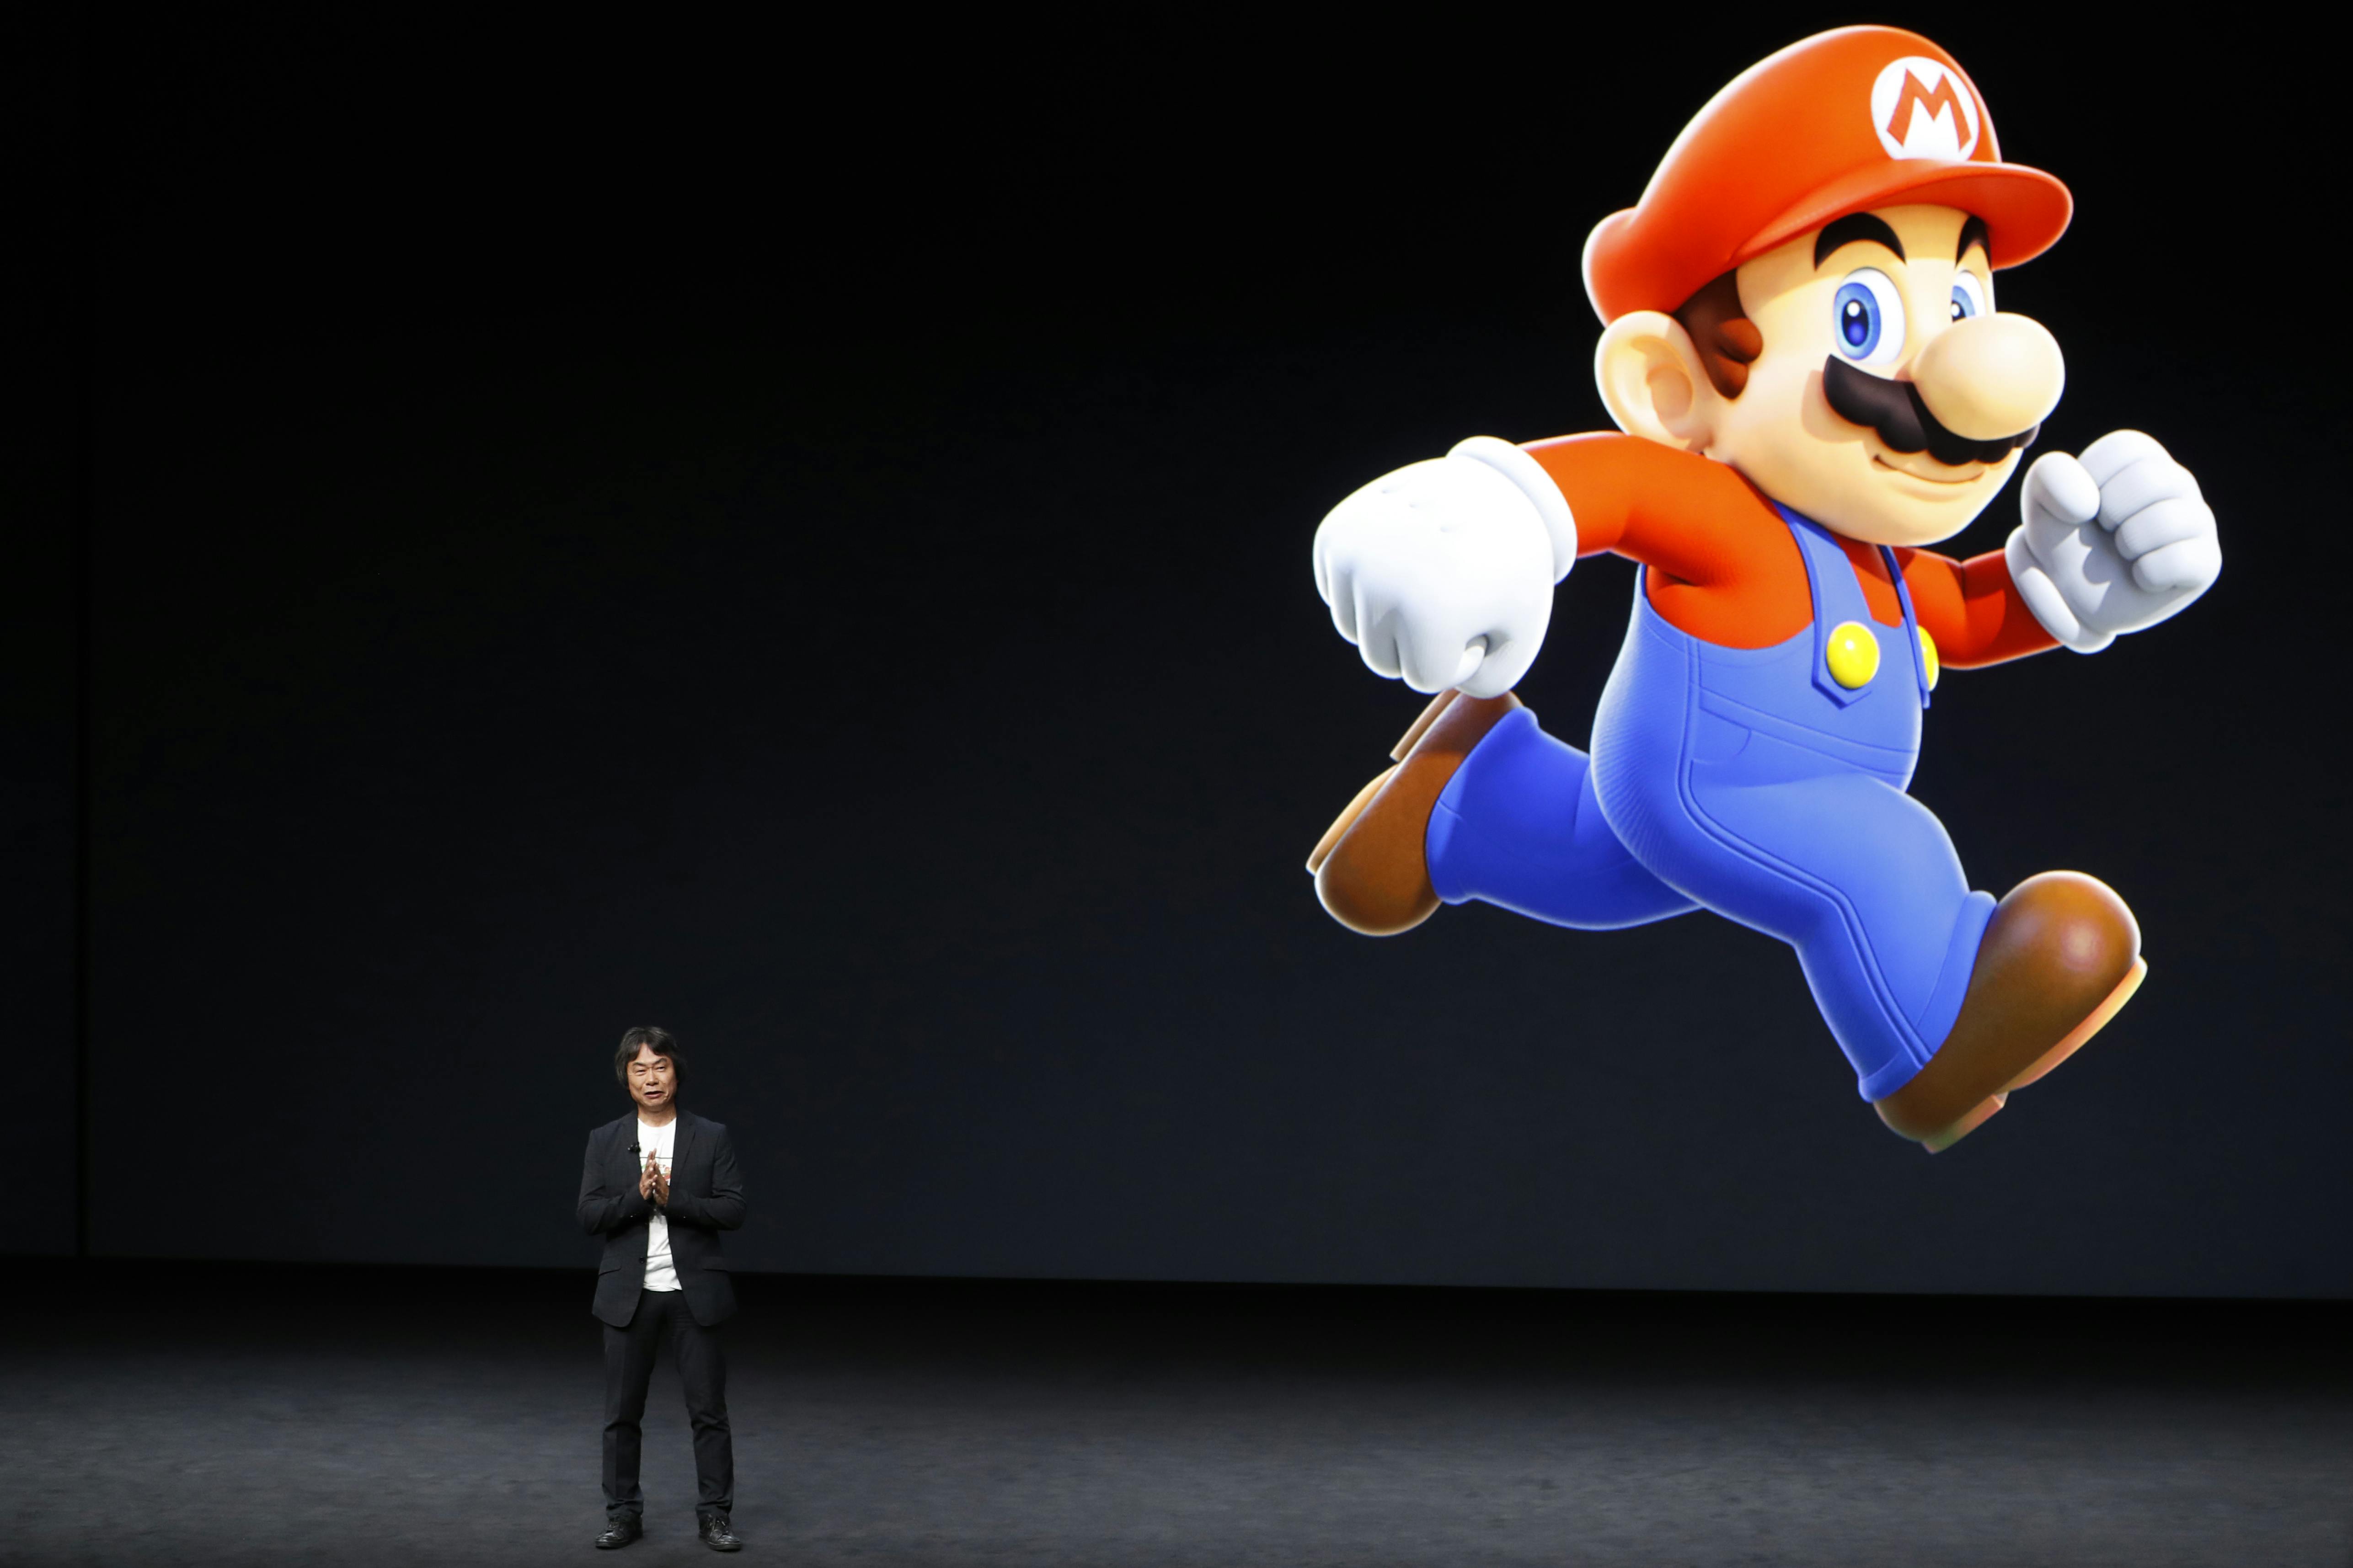 Super Mario' creator says gaming industry should put steady